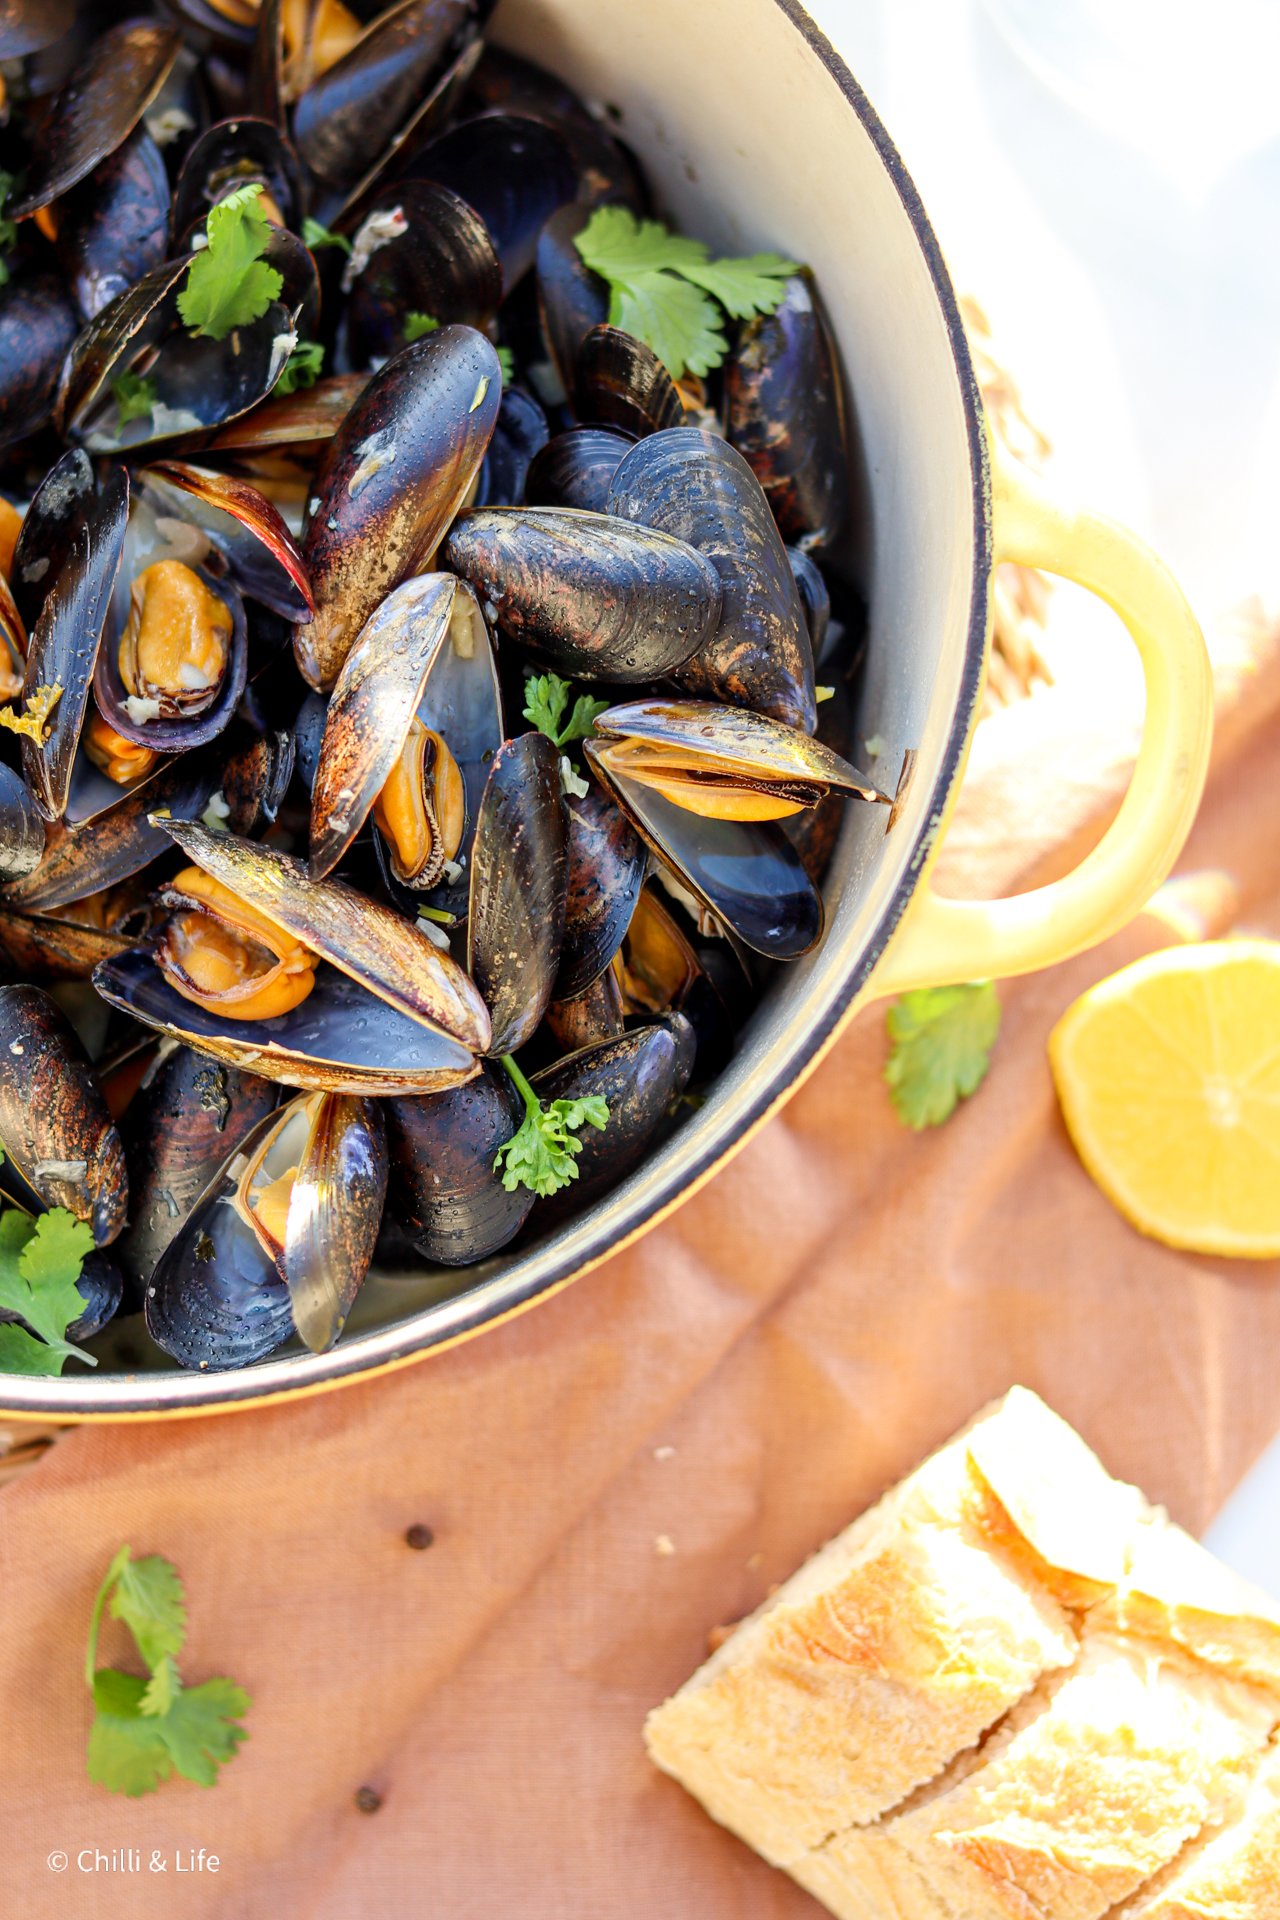 Classic Moules Marinière – Mussels in White Wine